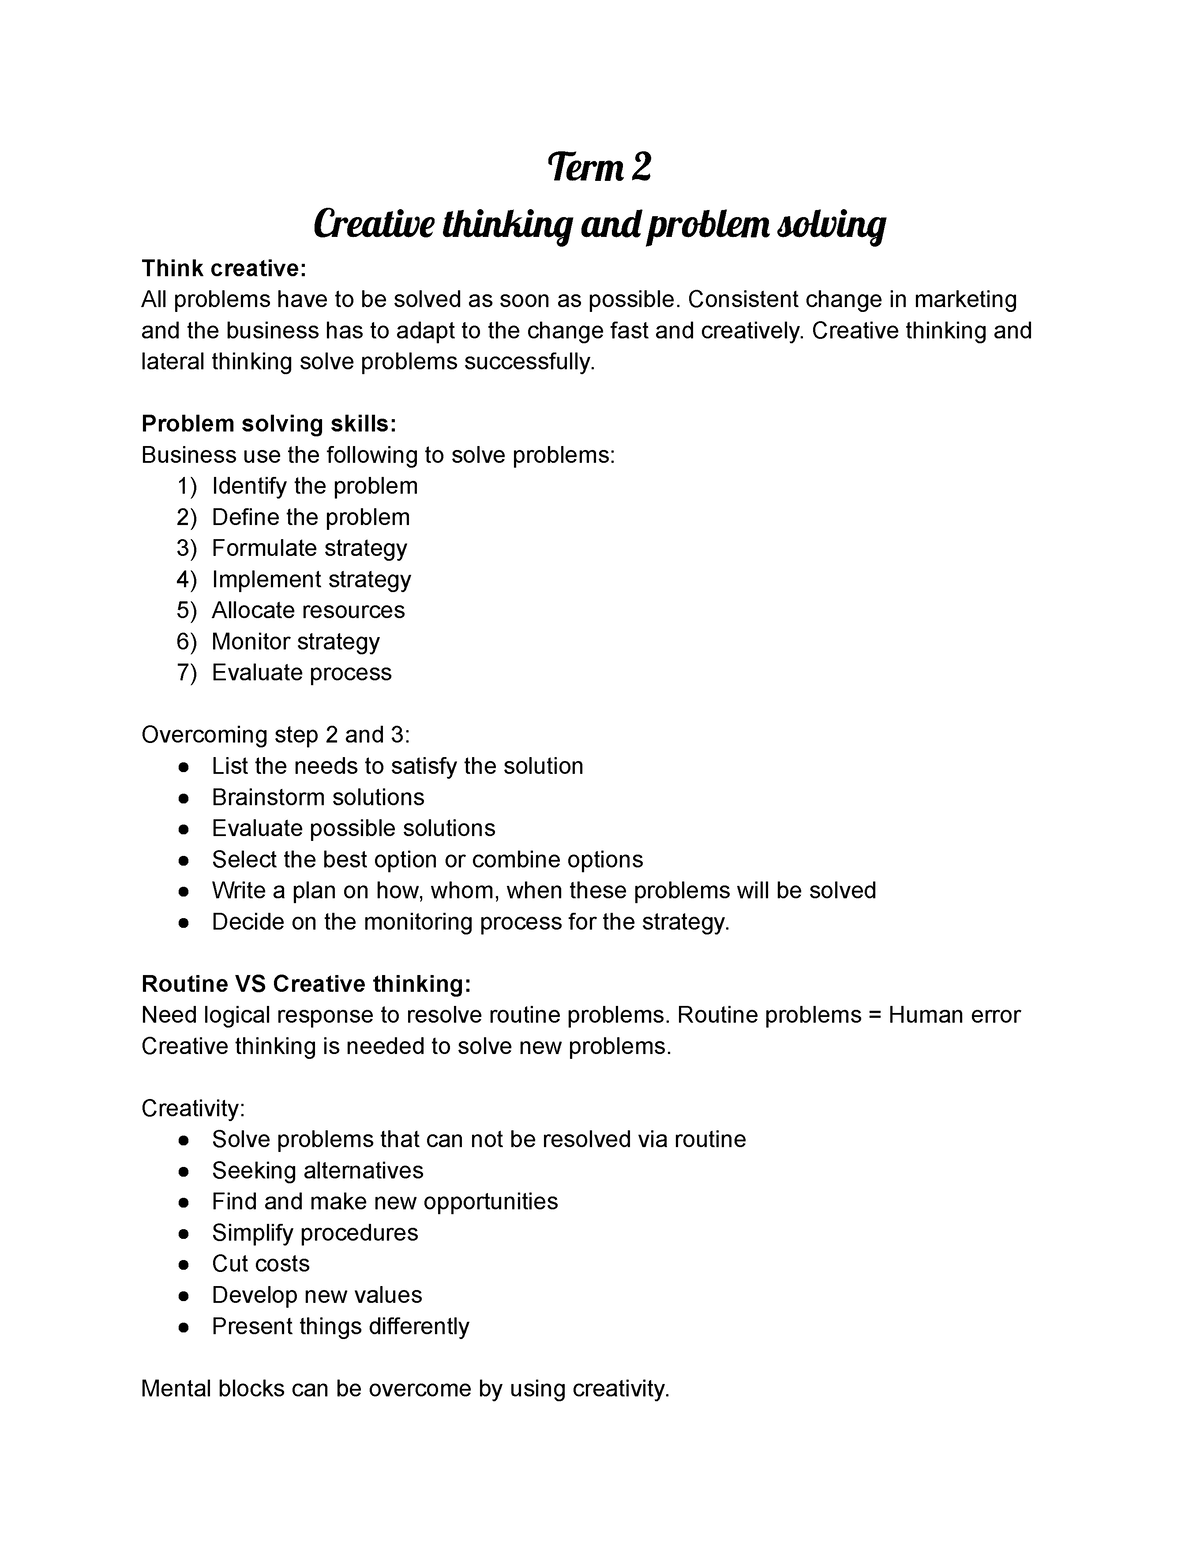 creative thinking and problem solving grade 11 notes pdf